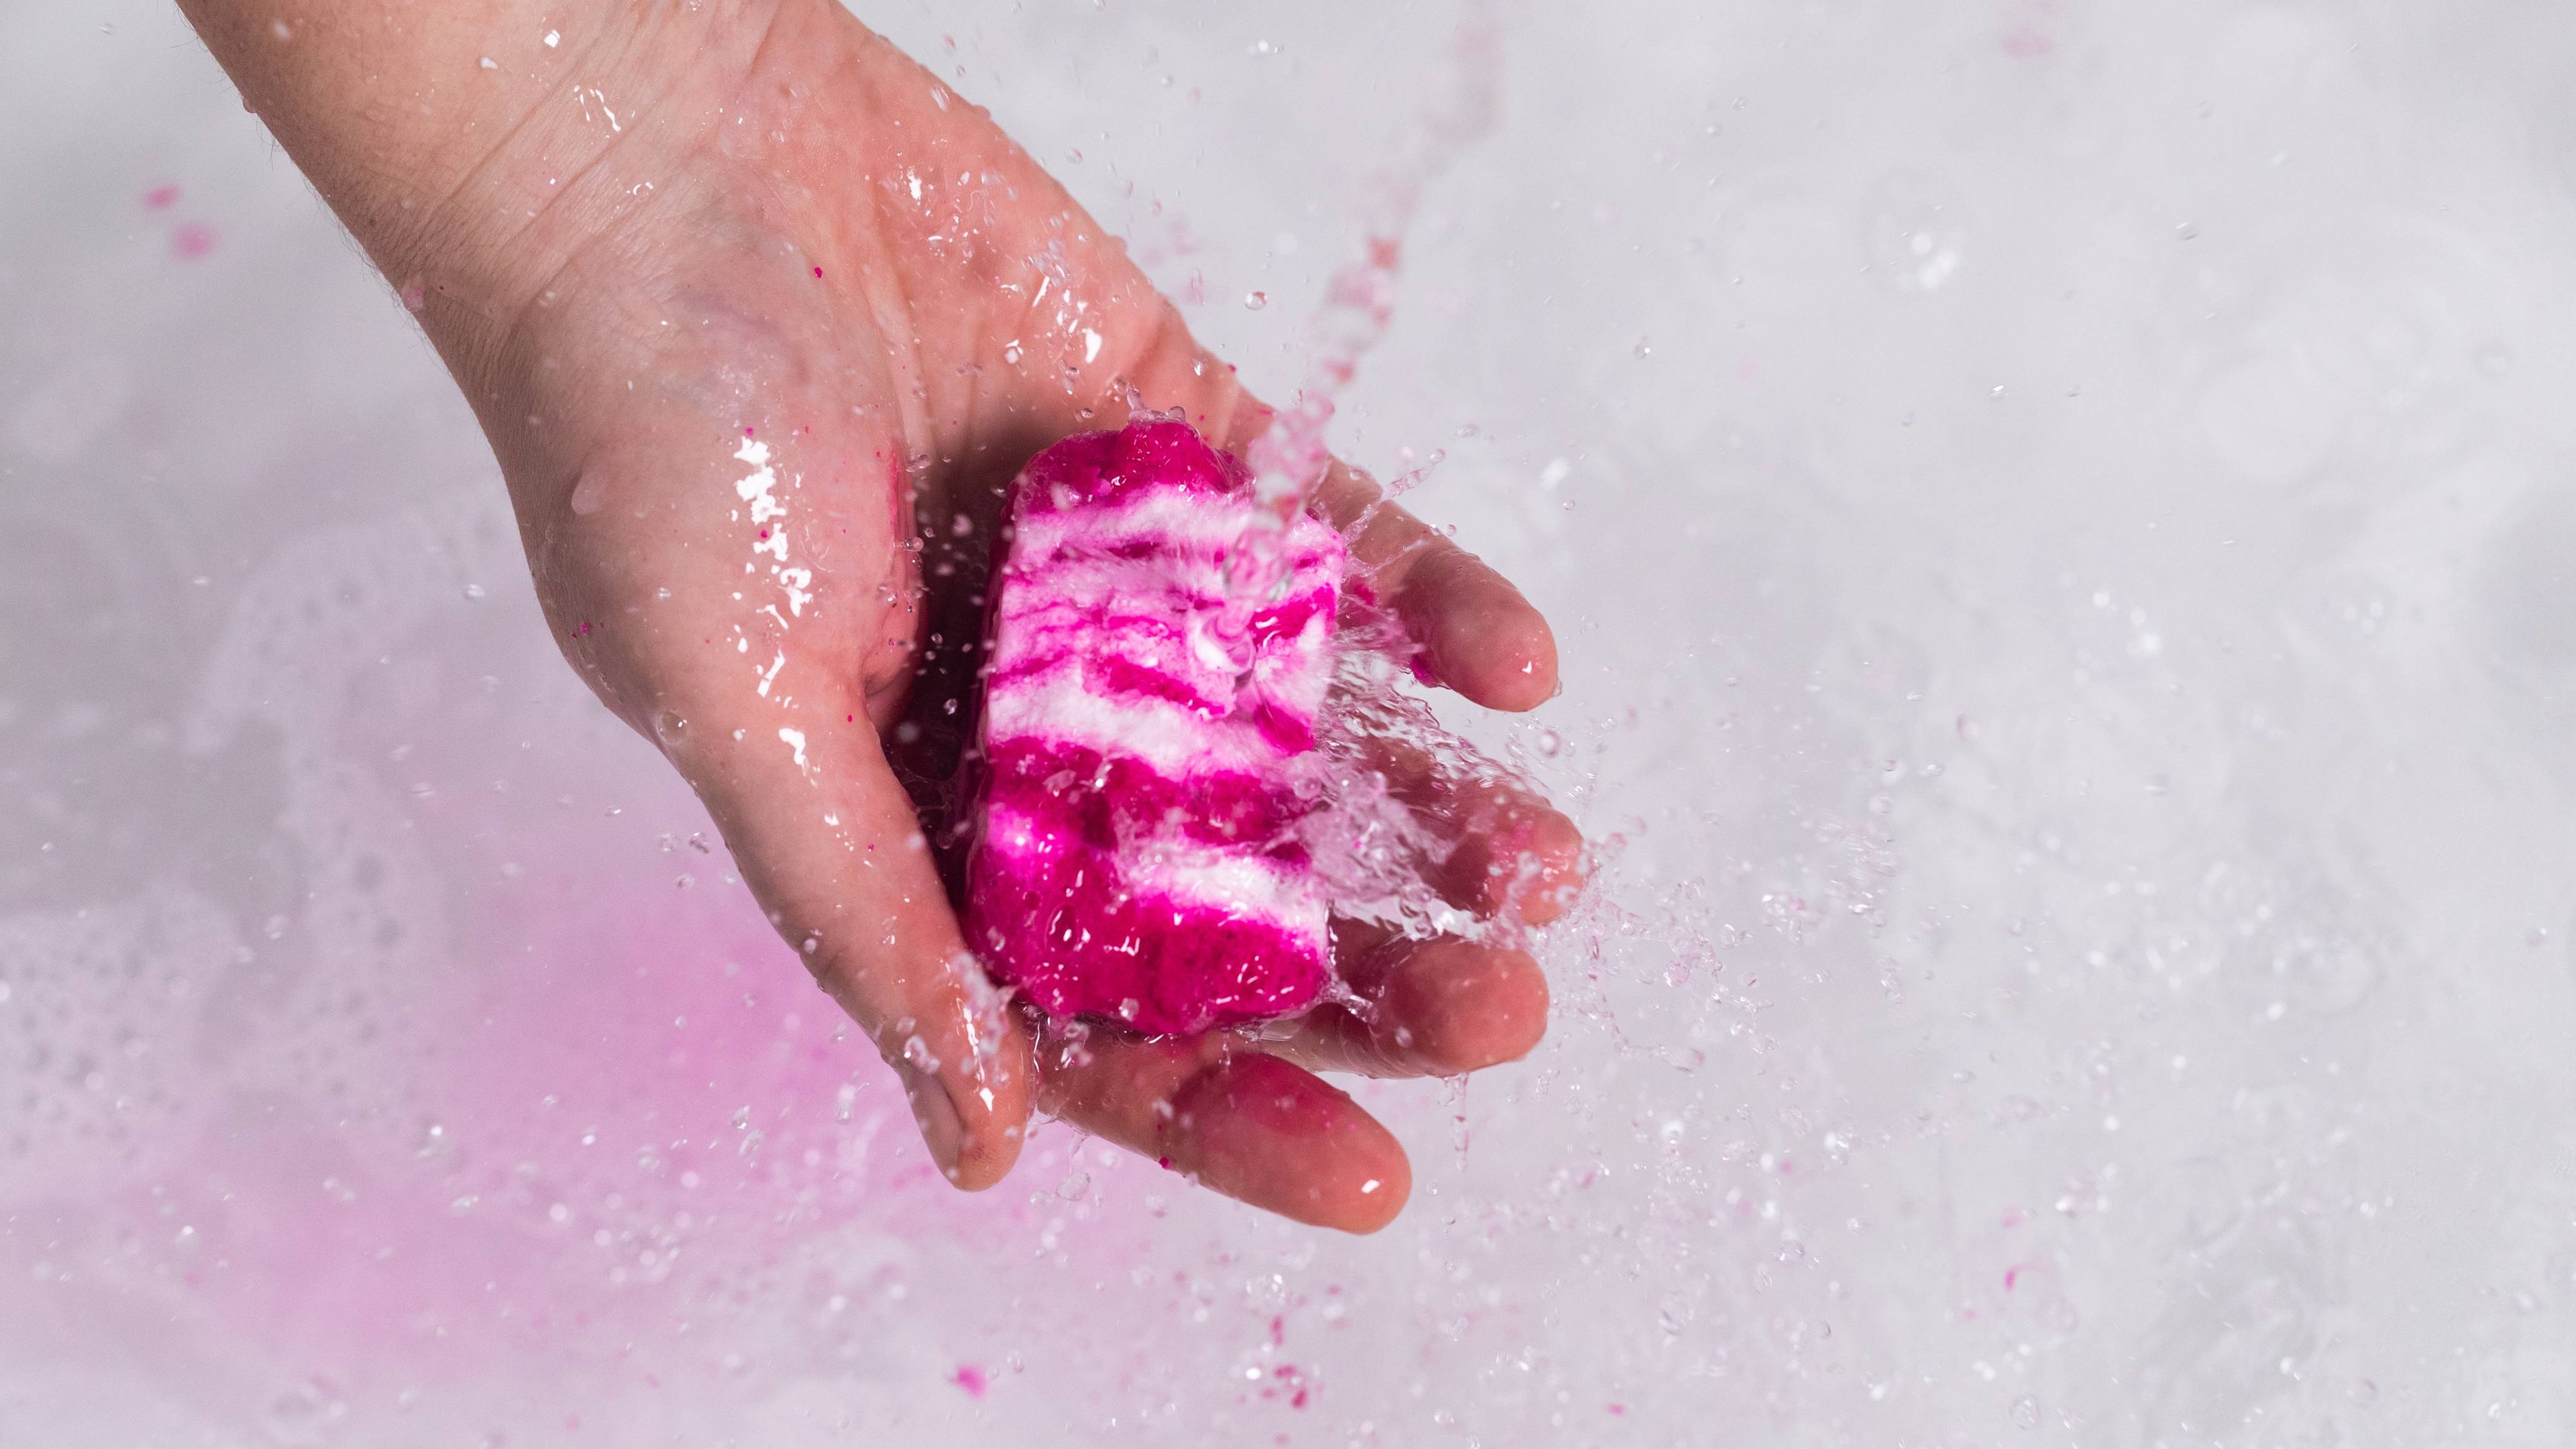 The model holds the Comforter bubble bar under running water, causing pooling, pink splashes of bubbles below.